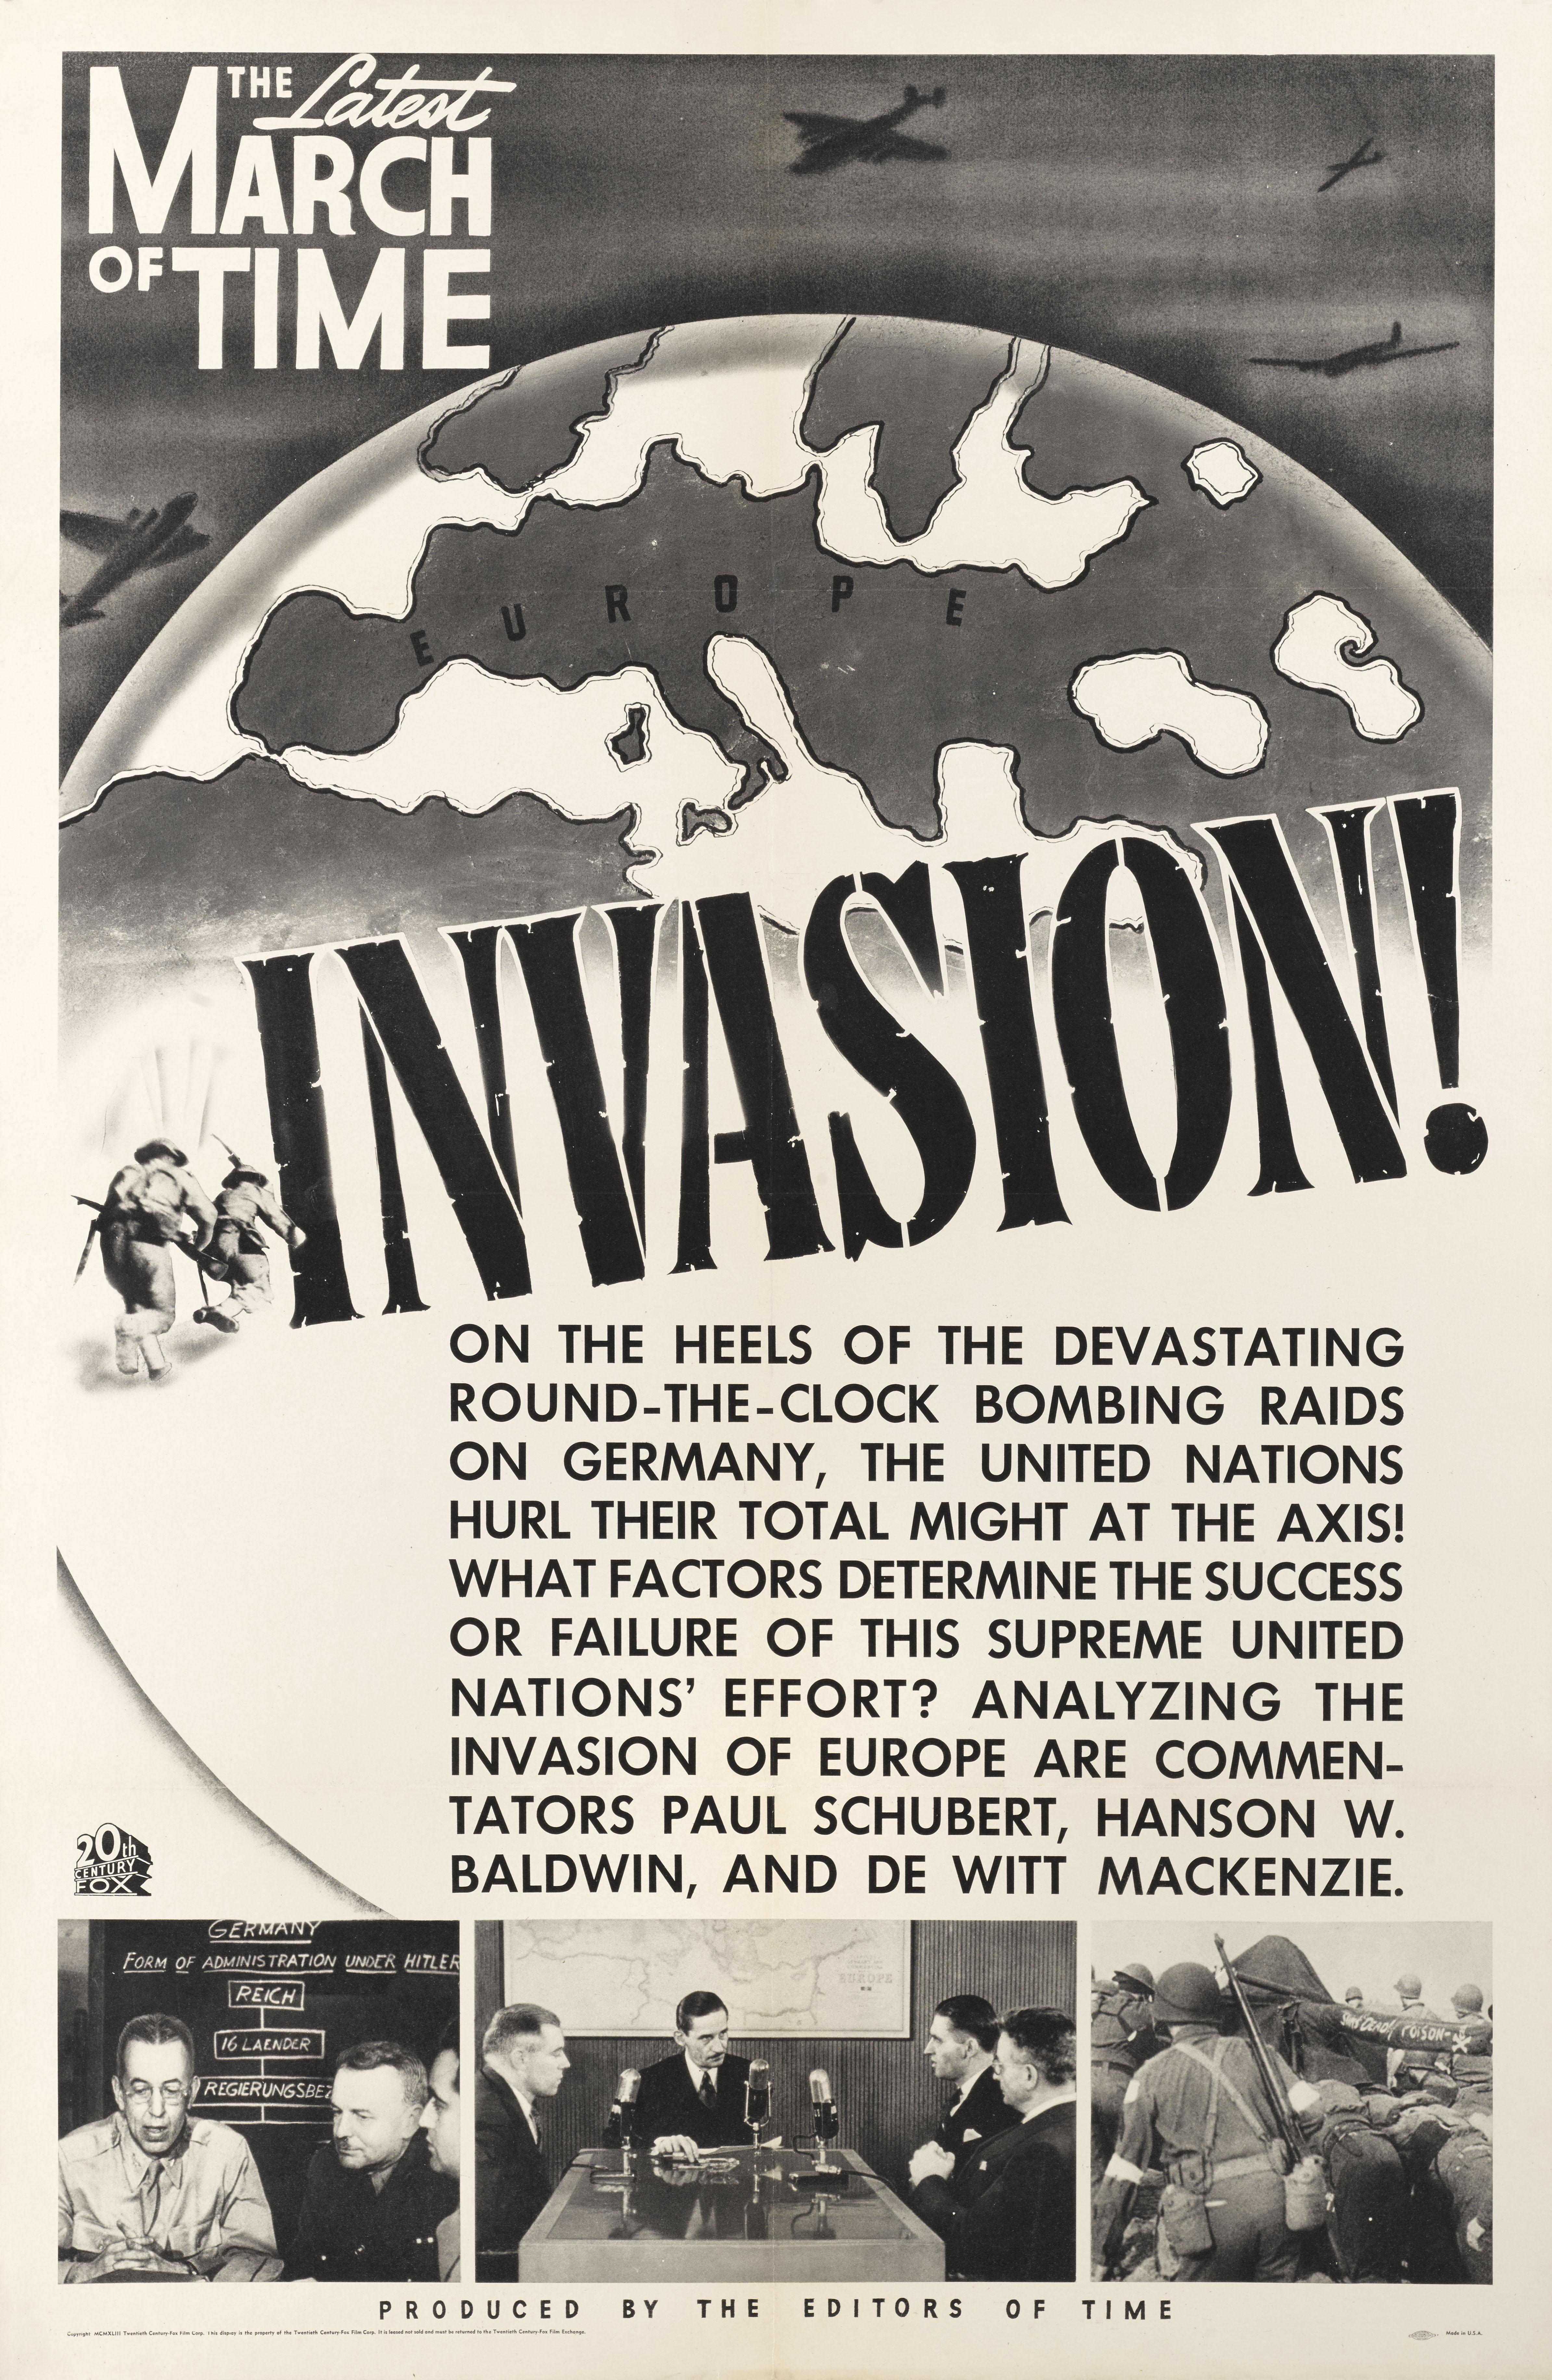 Original US poster for the 1943 World War II March of Time military documentary.
This was the produced by the editors of Time and shown in cinamas before the main showing.
This poster is conservation linen backed and would be shipped rolled in a